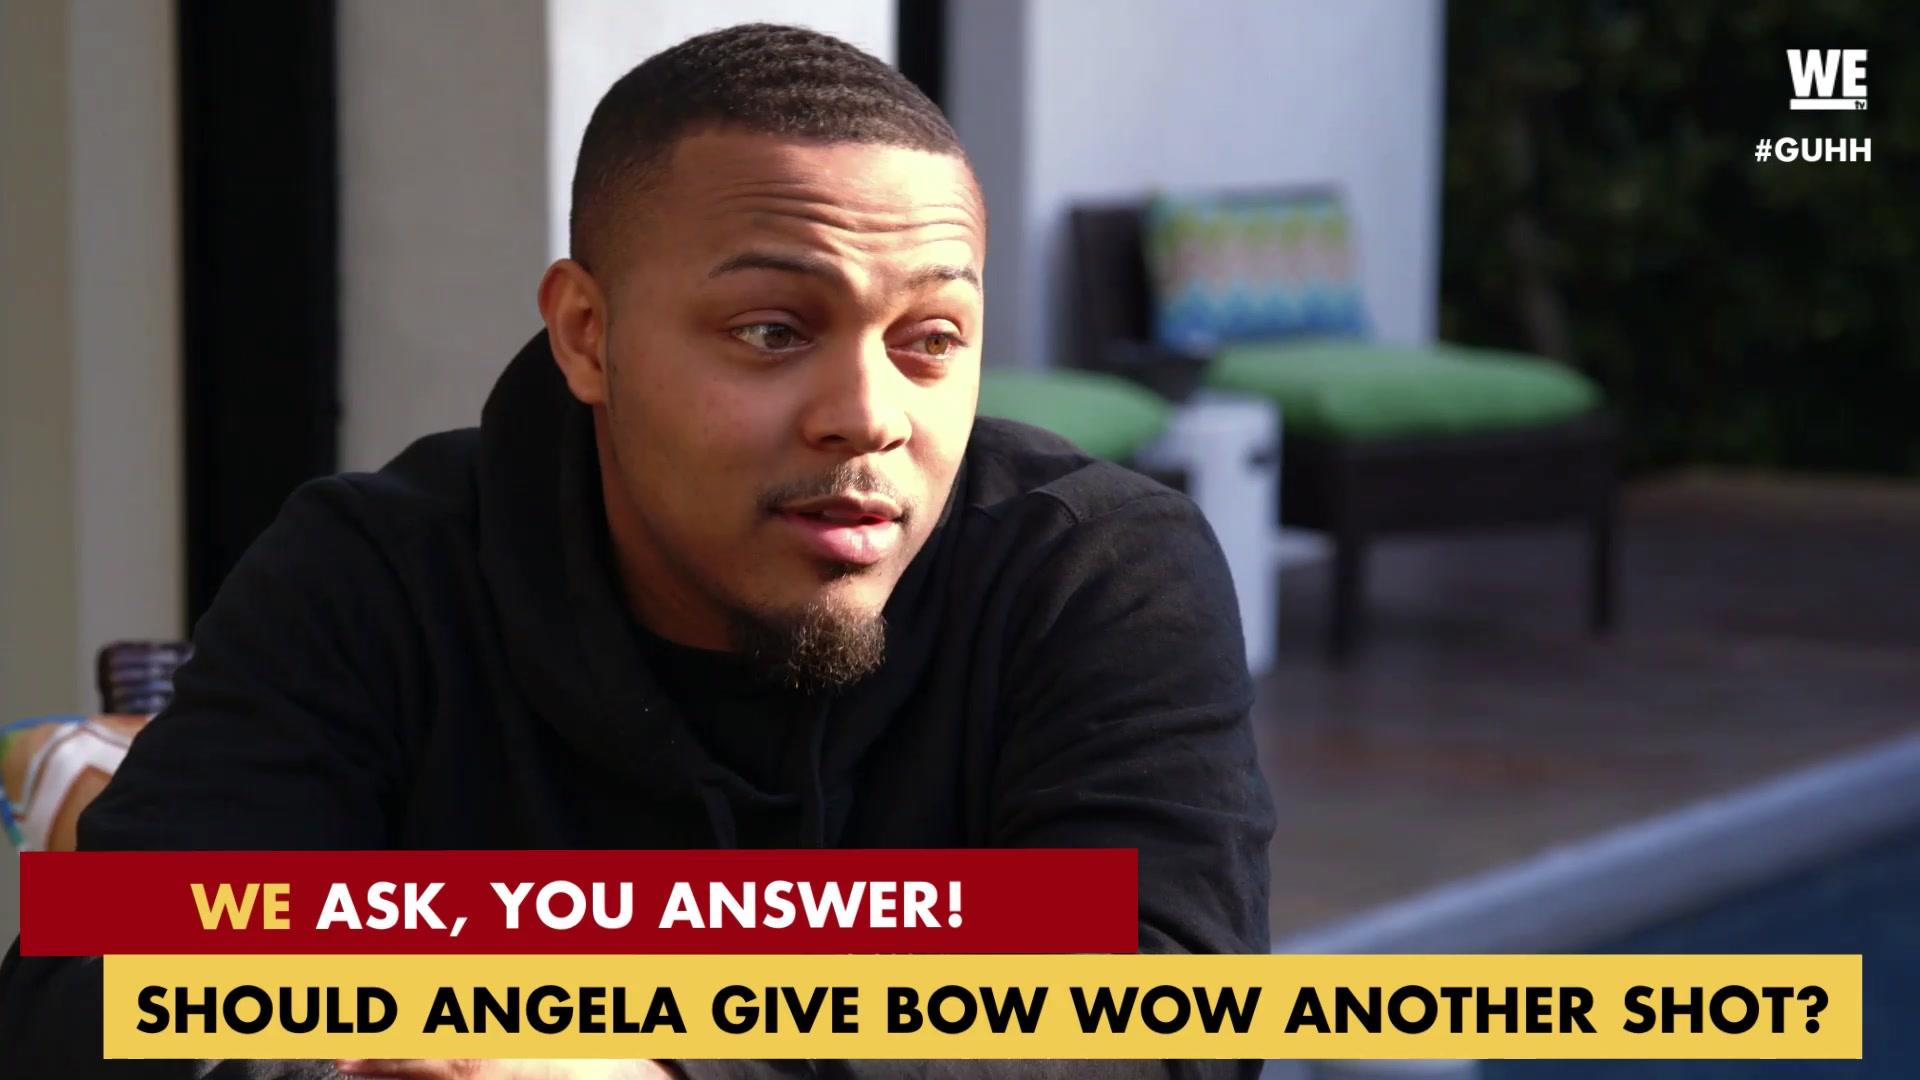 Watch WE Ask, You Answer: Should Angela Give Bow Wow Another Shot? | Growing Up Hip Hop Video Extras